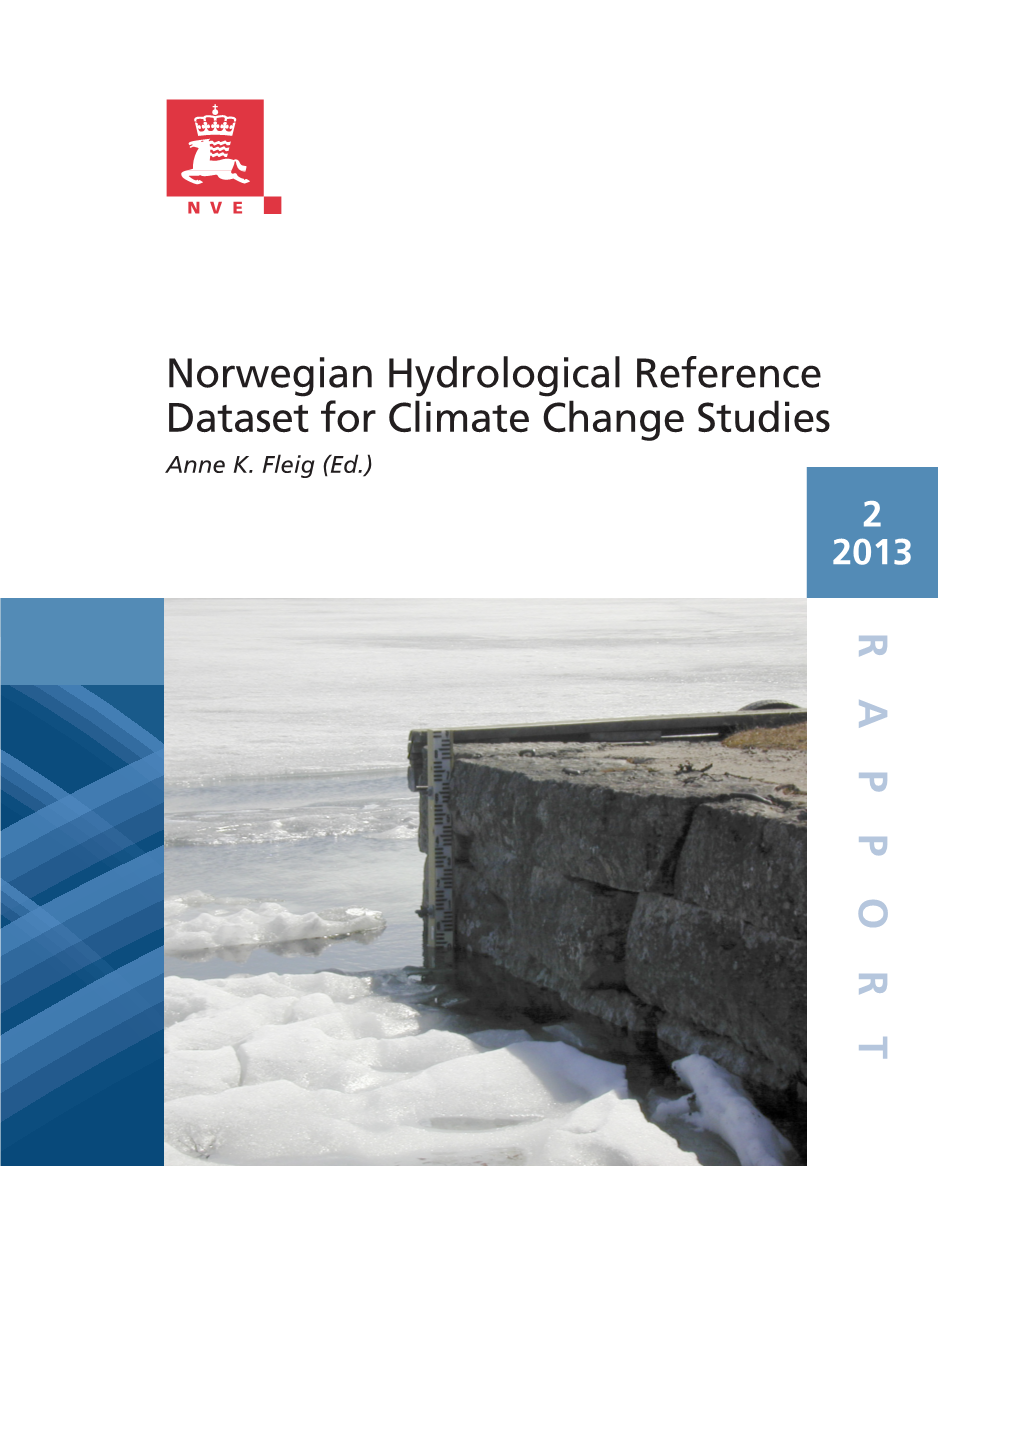 Norwegian Hydrological Reference Dataset for Climate Change Studies